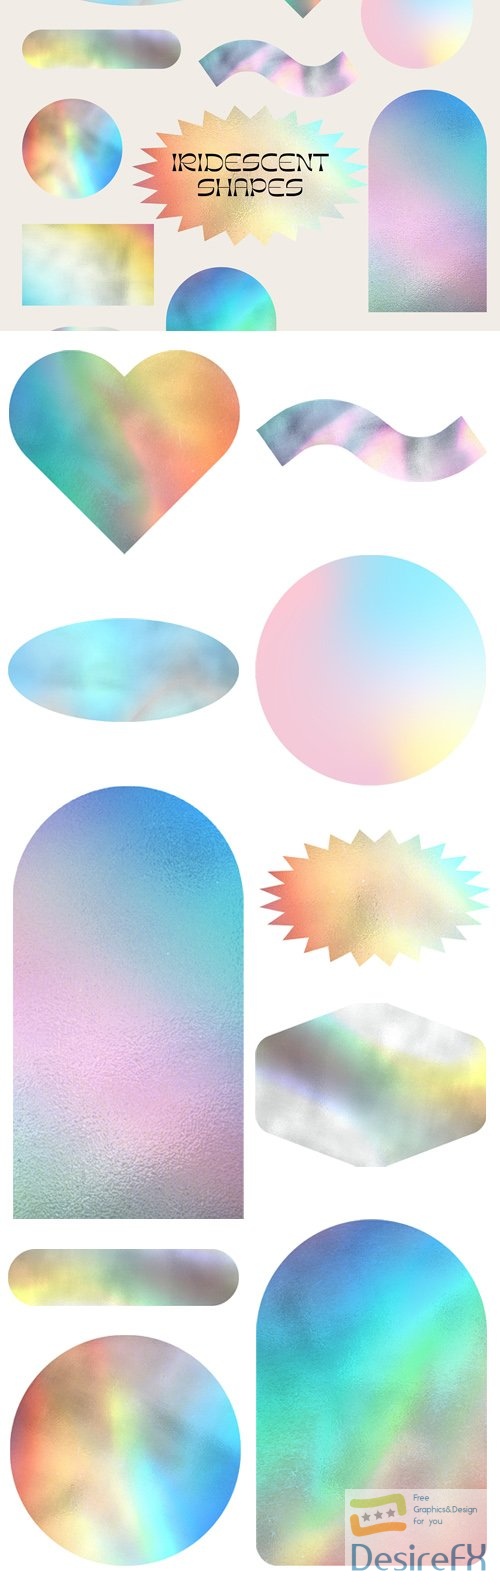 Iridescent Shapes Pack